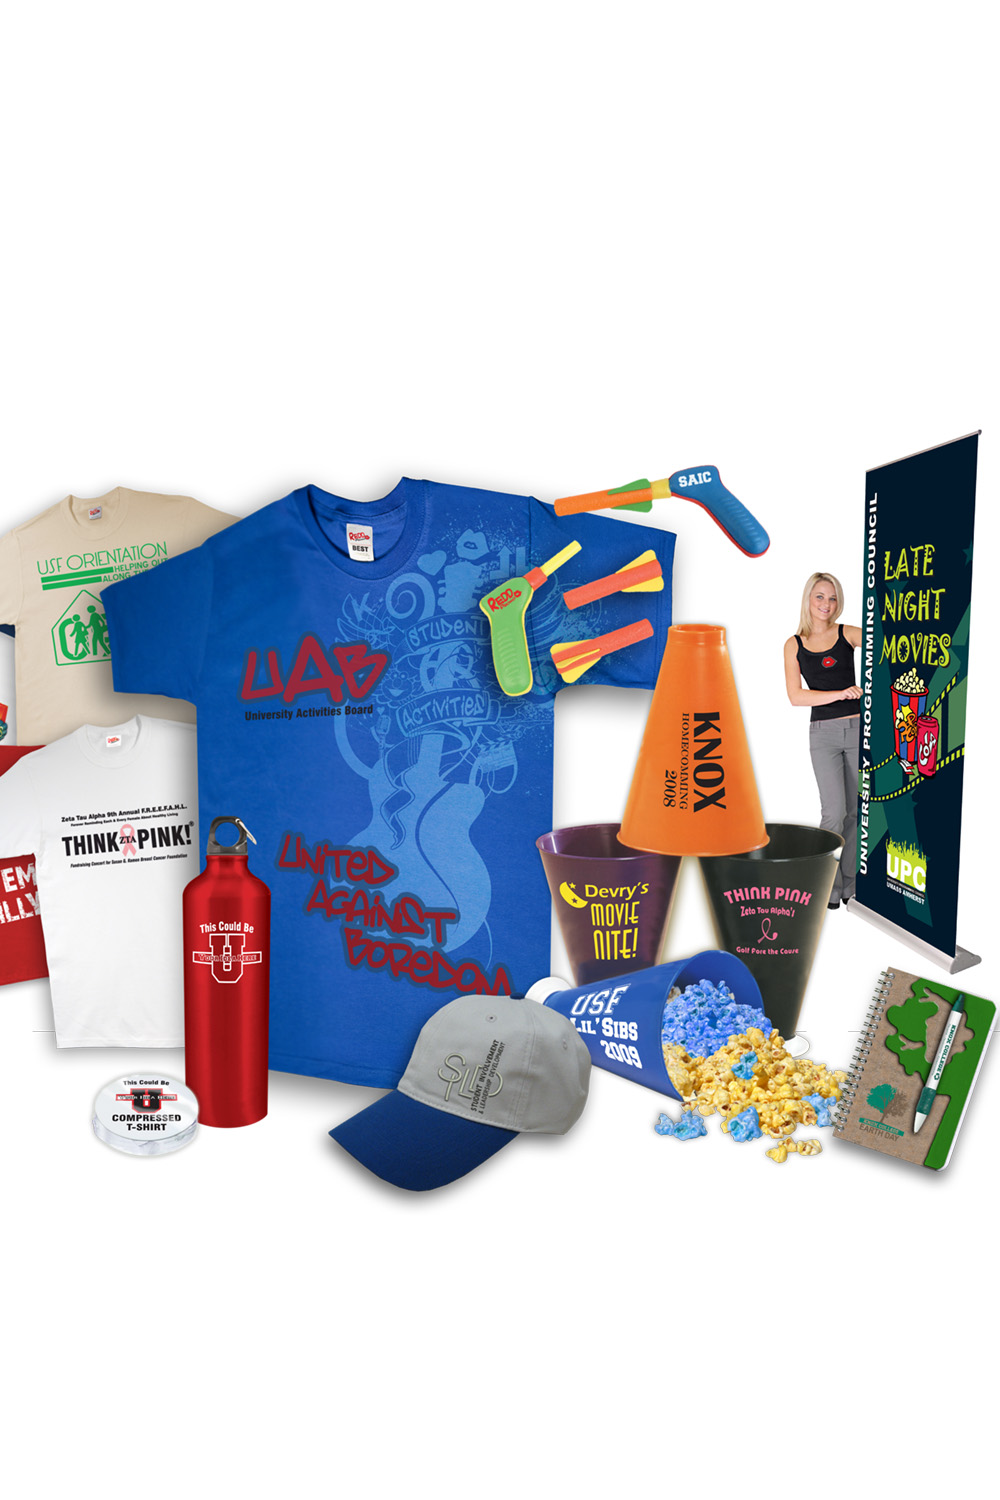 Thousands of Customizable Promotional Items On Demand